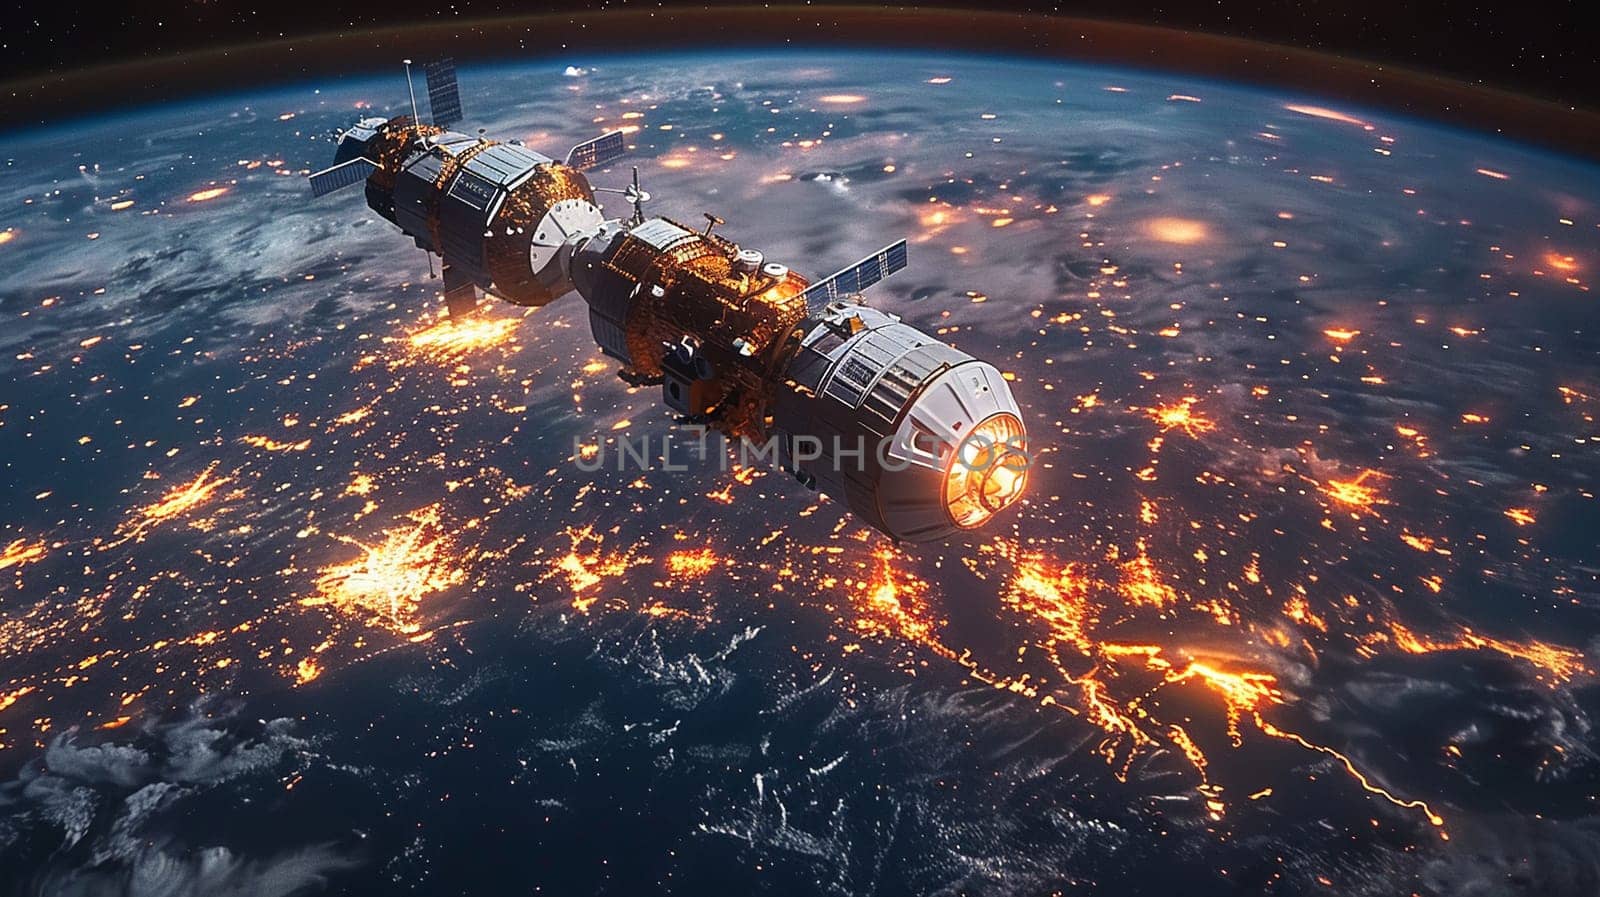 3D-rendered image of space station observing Earth Hour with lights turned off against cosmos.